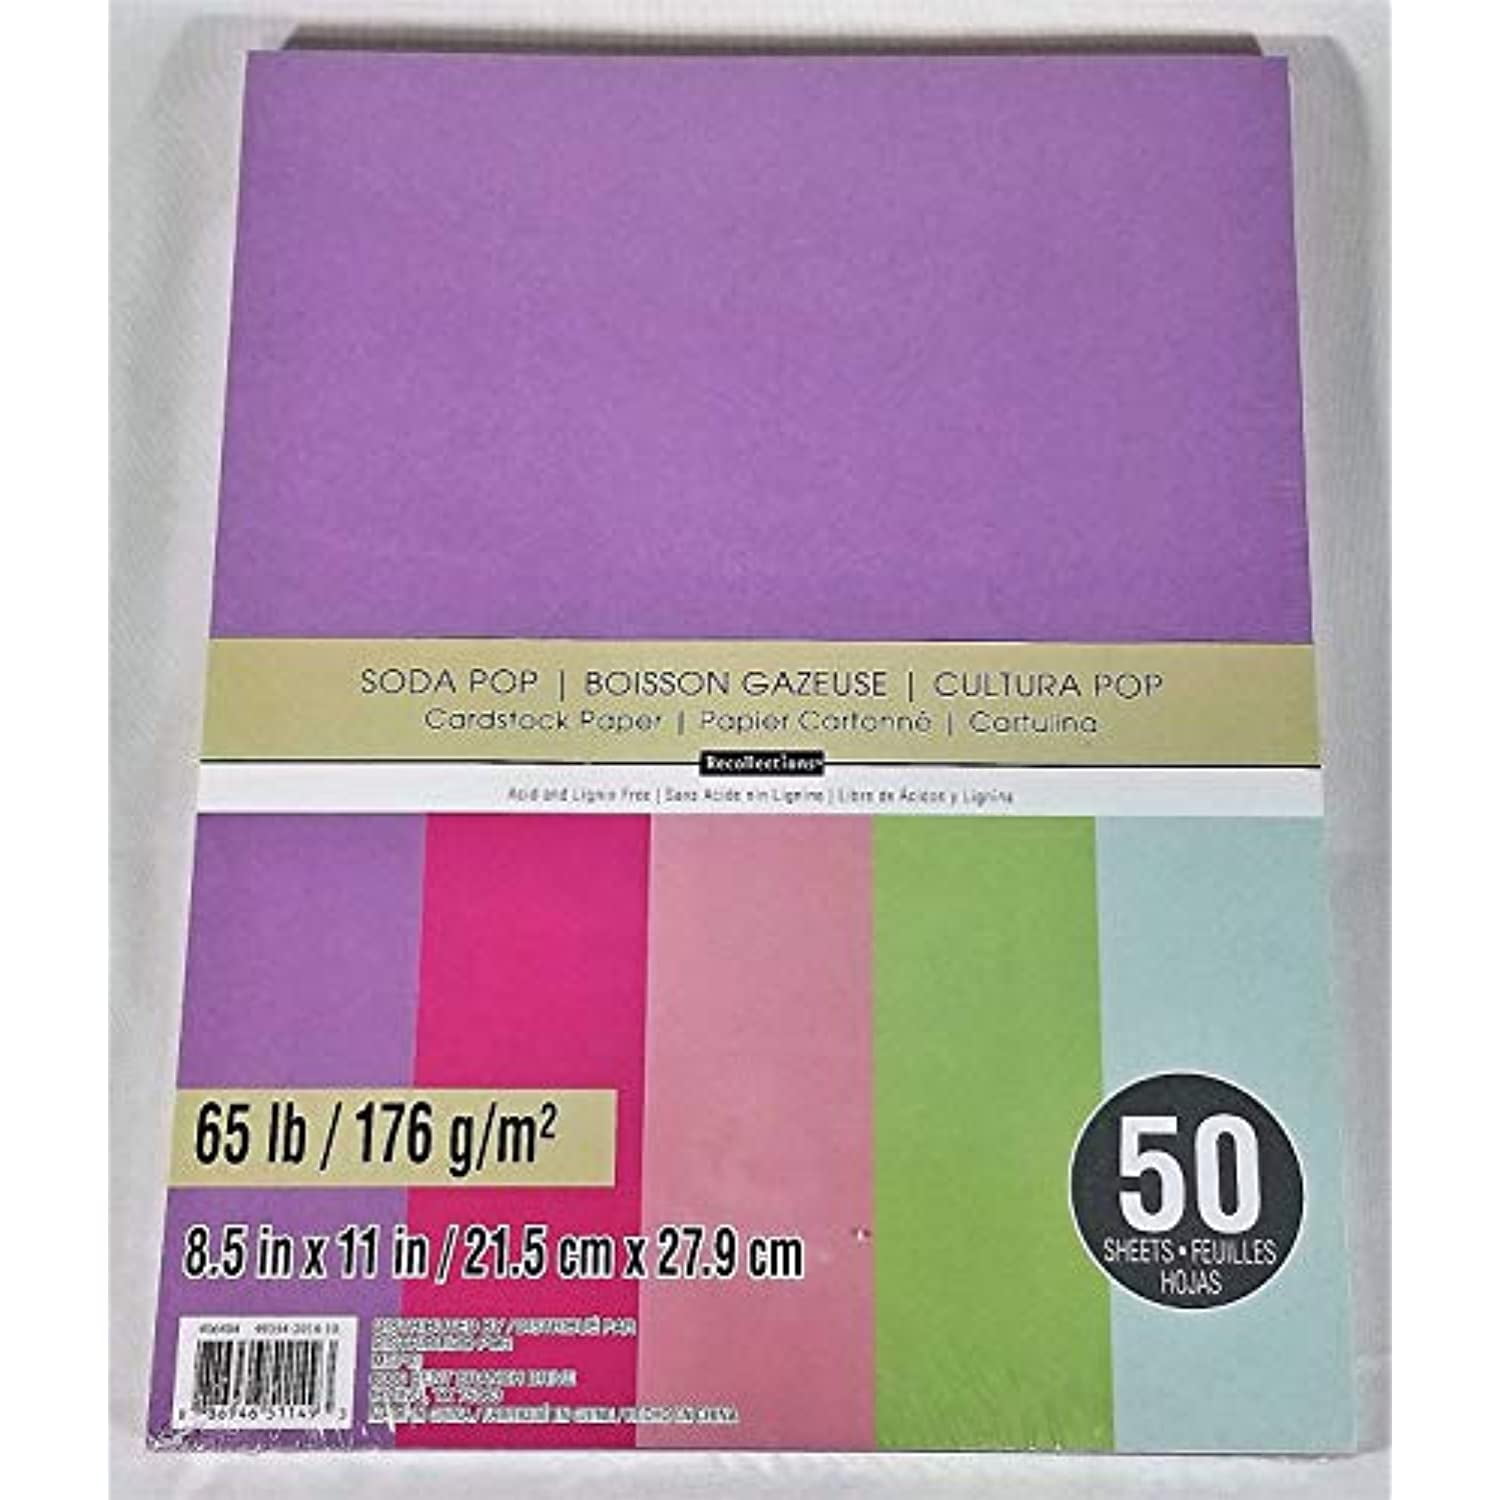 Recollections Cardstock Paper, 8 1/2 x 11 Purple Passion Value 2-Pack